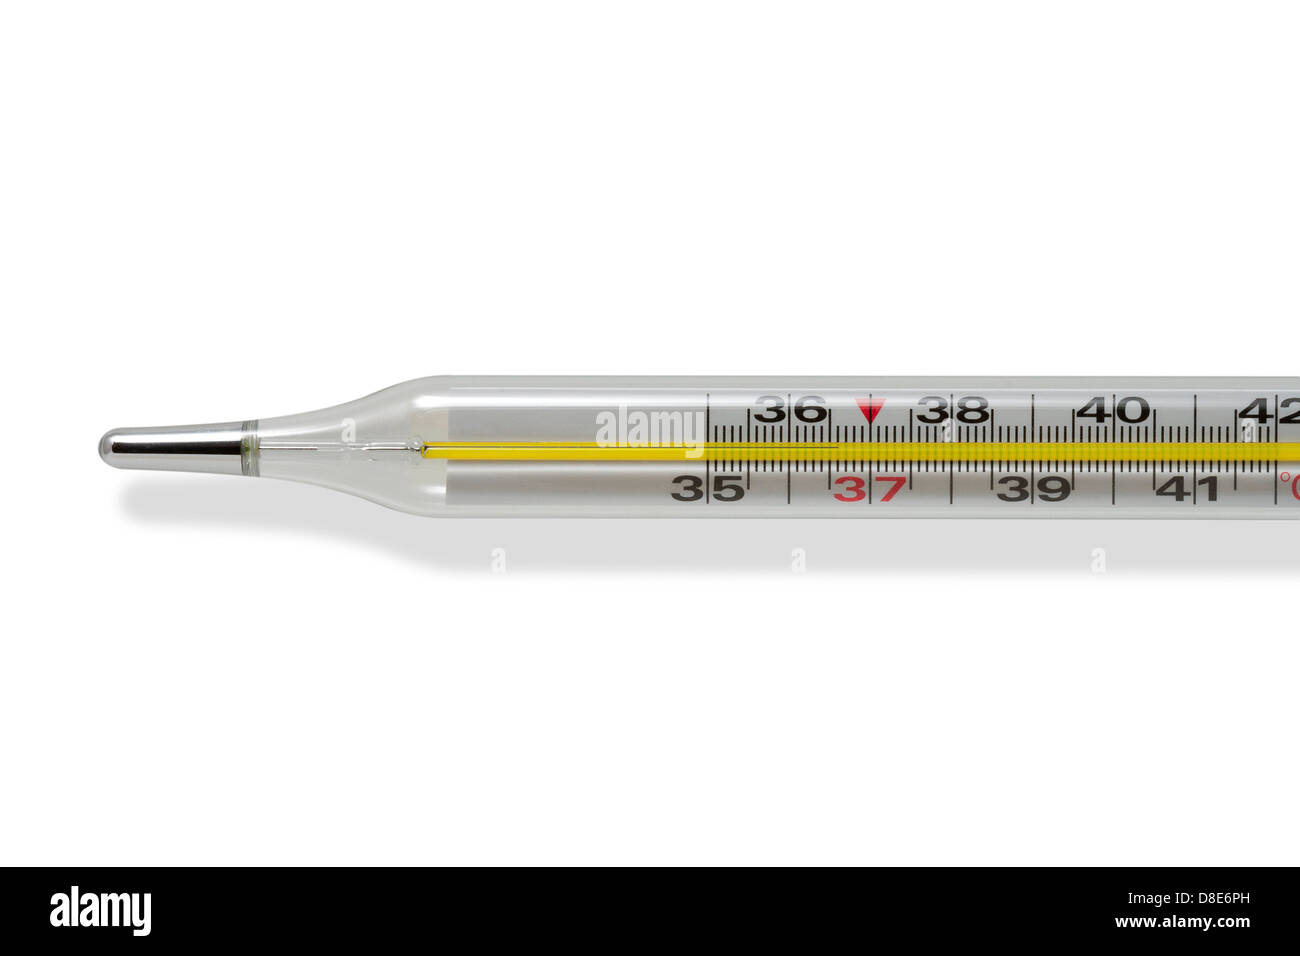 https://c8.alamy.com/comp/D8E6PH/medical-thermometer-with-normal-temperature-macro-isolated-on-white-D8E6PH.jpg